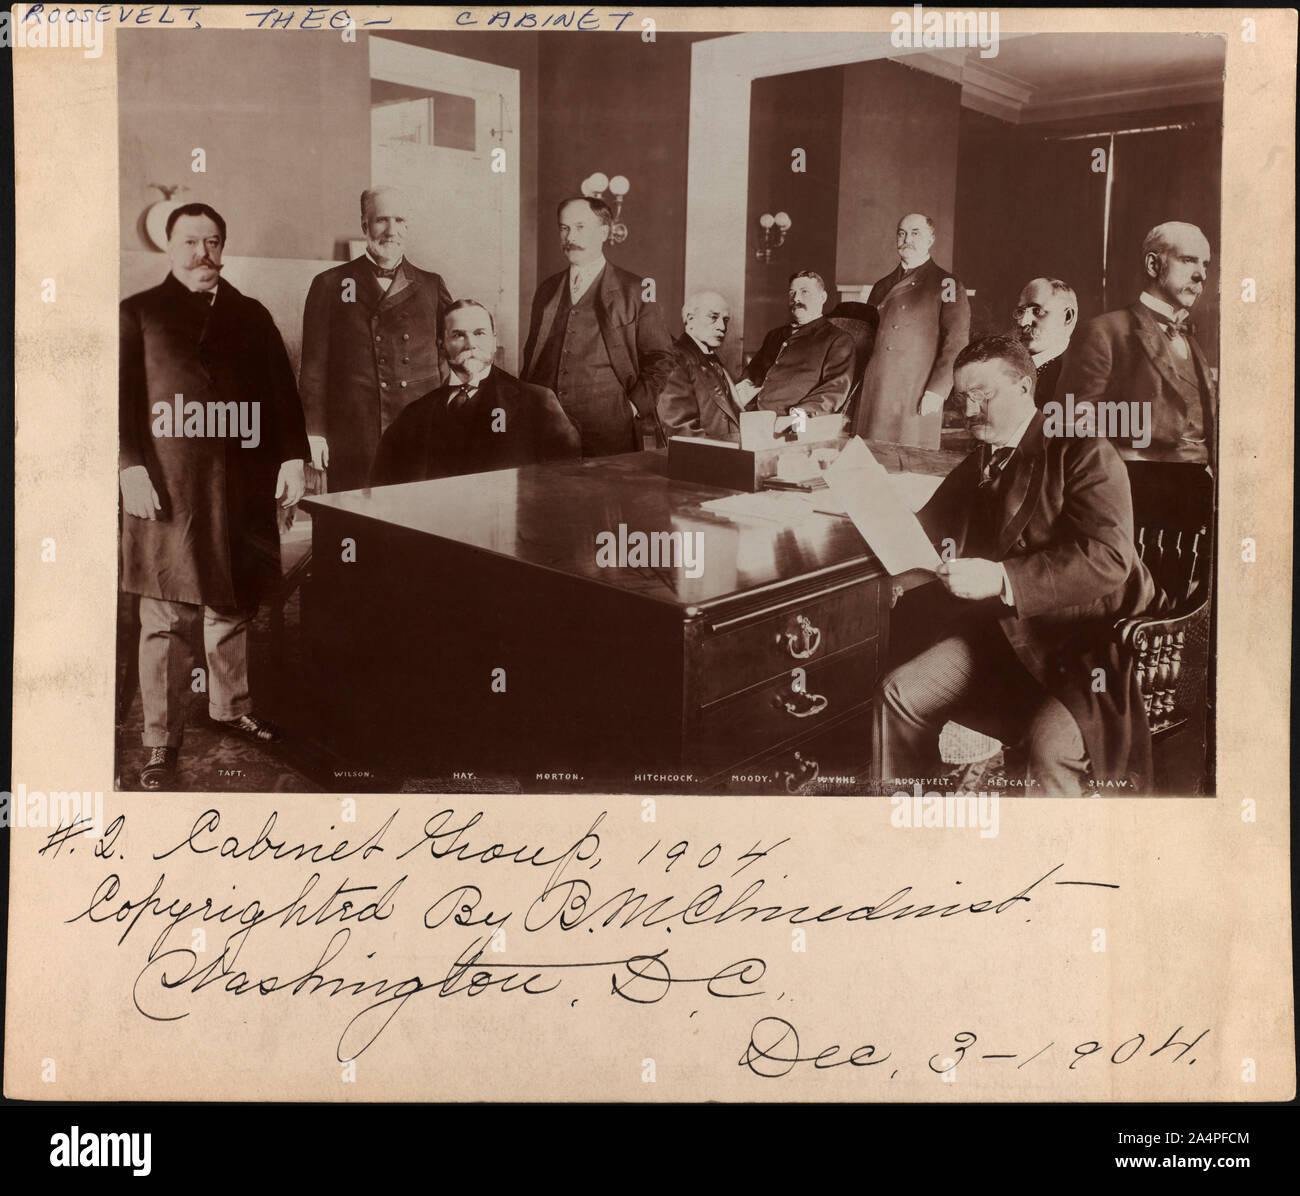 U.S. President Theodore Roosevelt seated at Desk Reading, Surrounded by Superimposed Images of his Cabinet Members, Washington, D.C., USA, Photograph by Barnett McFee Clinedinst, December 3, 1904 Stock Photo